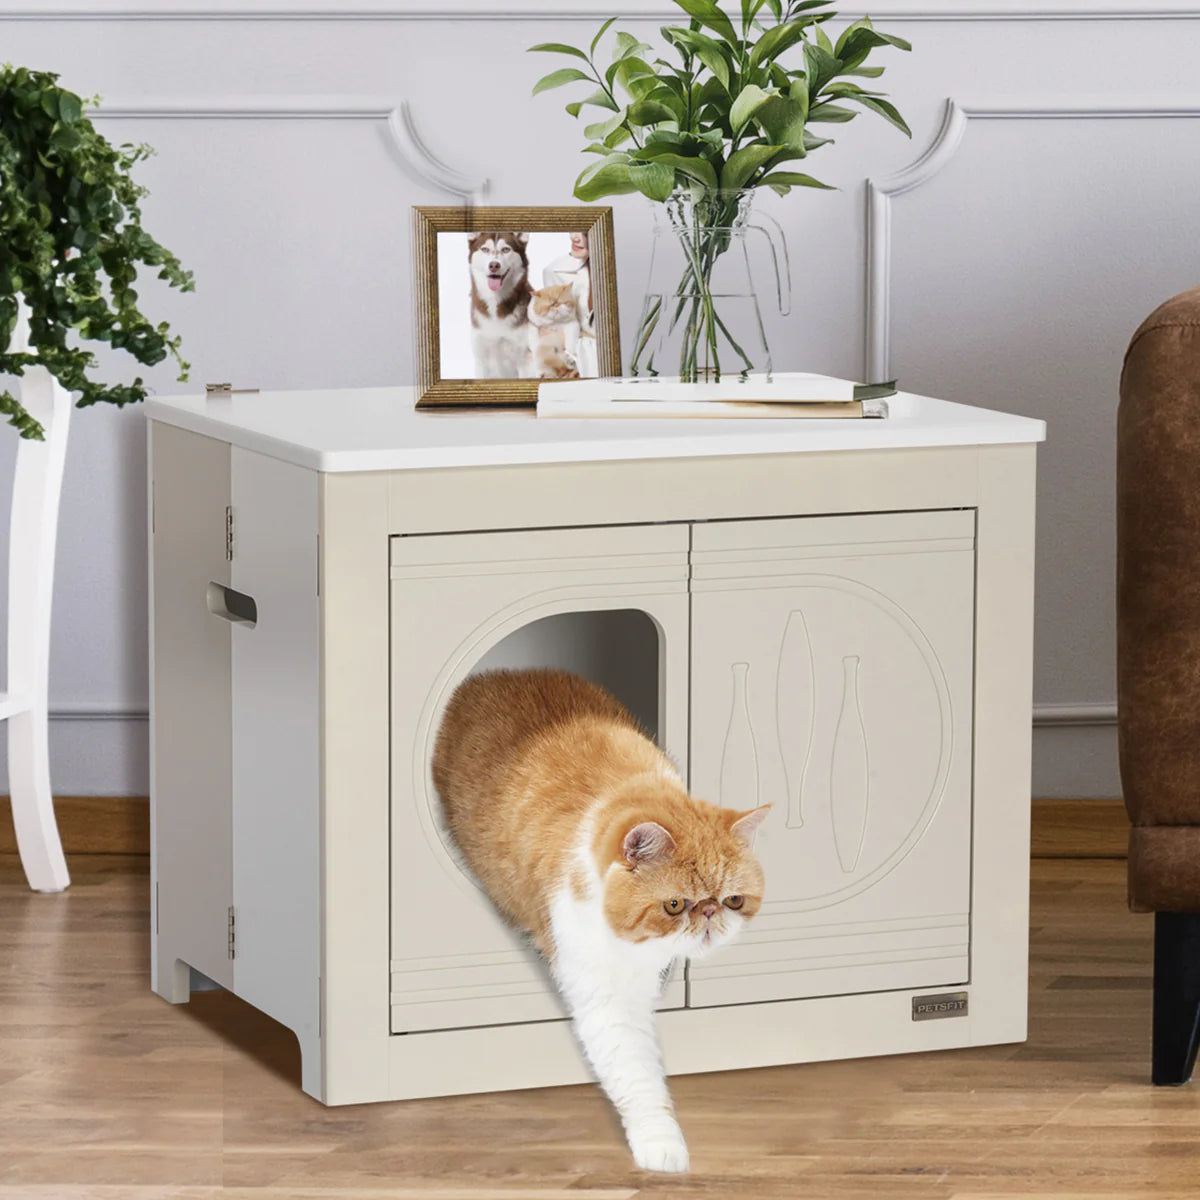 [PETSFIT]-Collapsible Litter Box Enclosure, No Assembly Needed